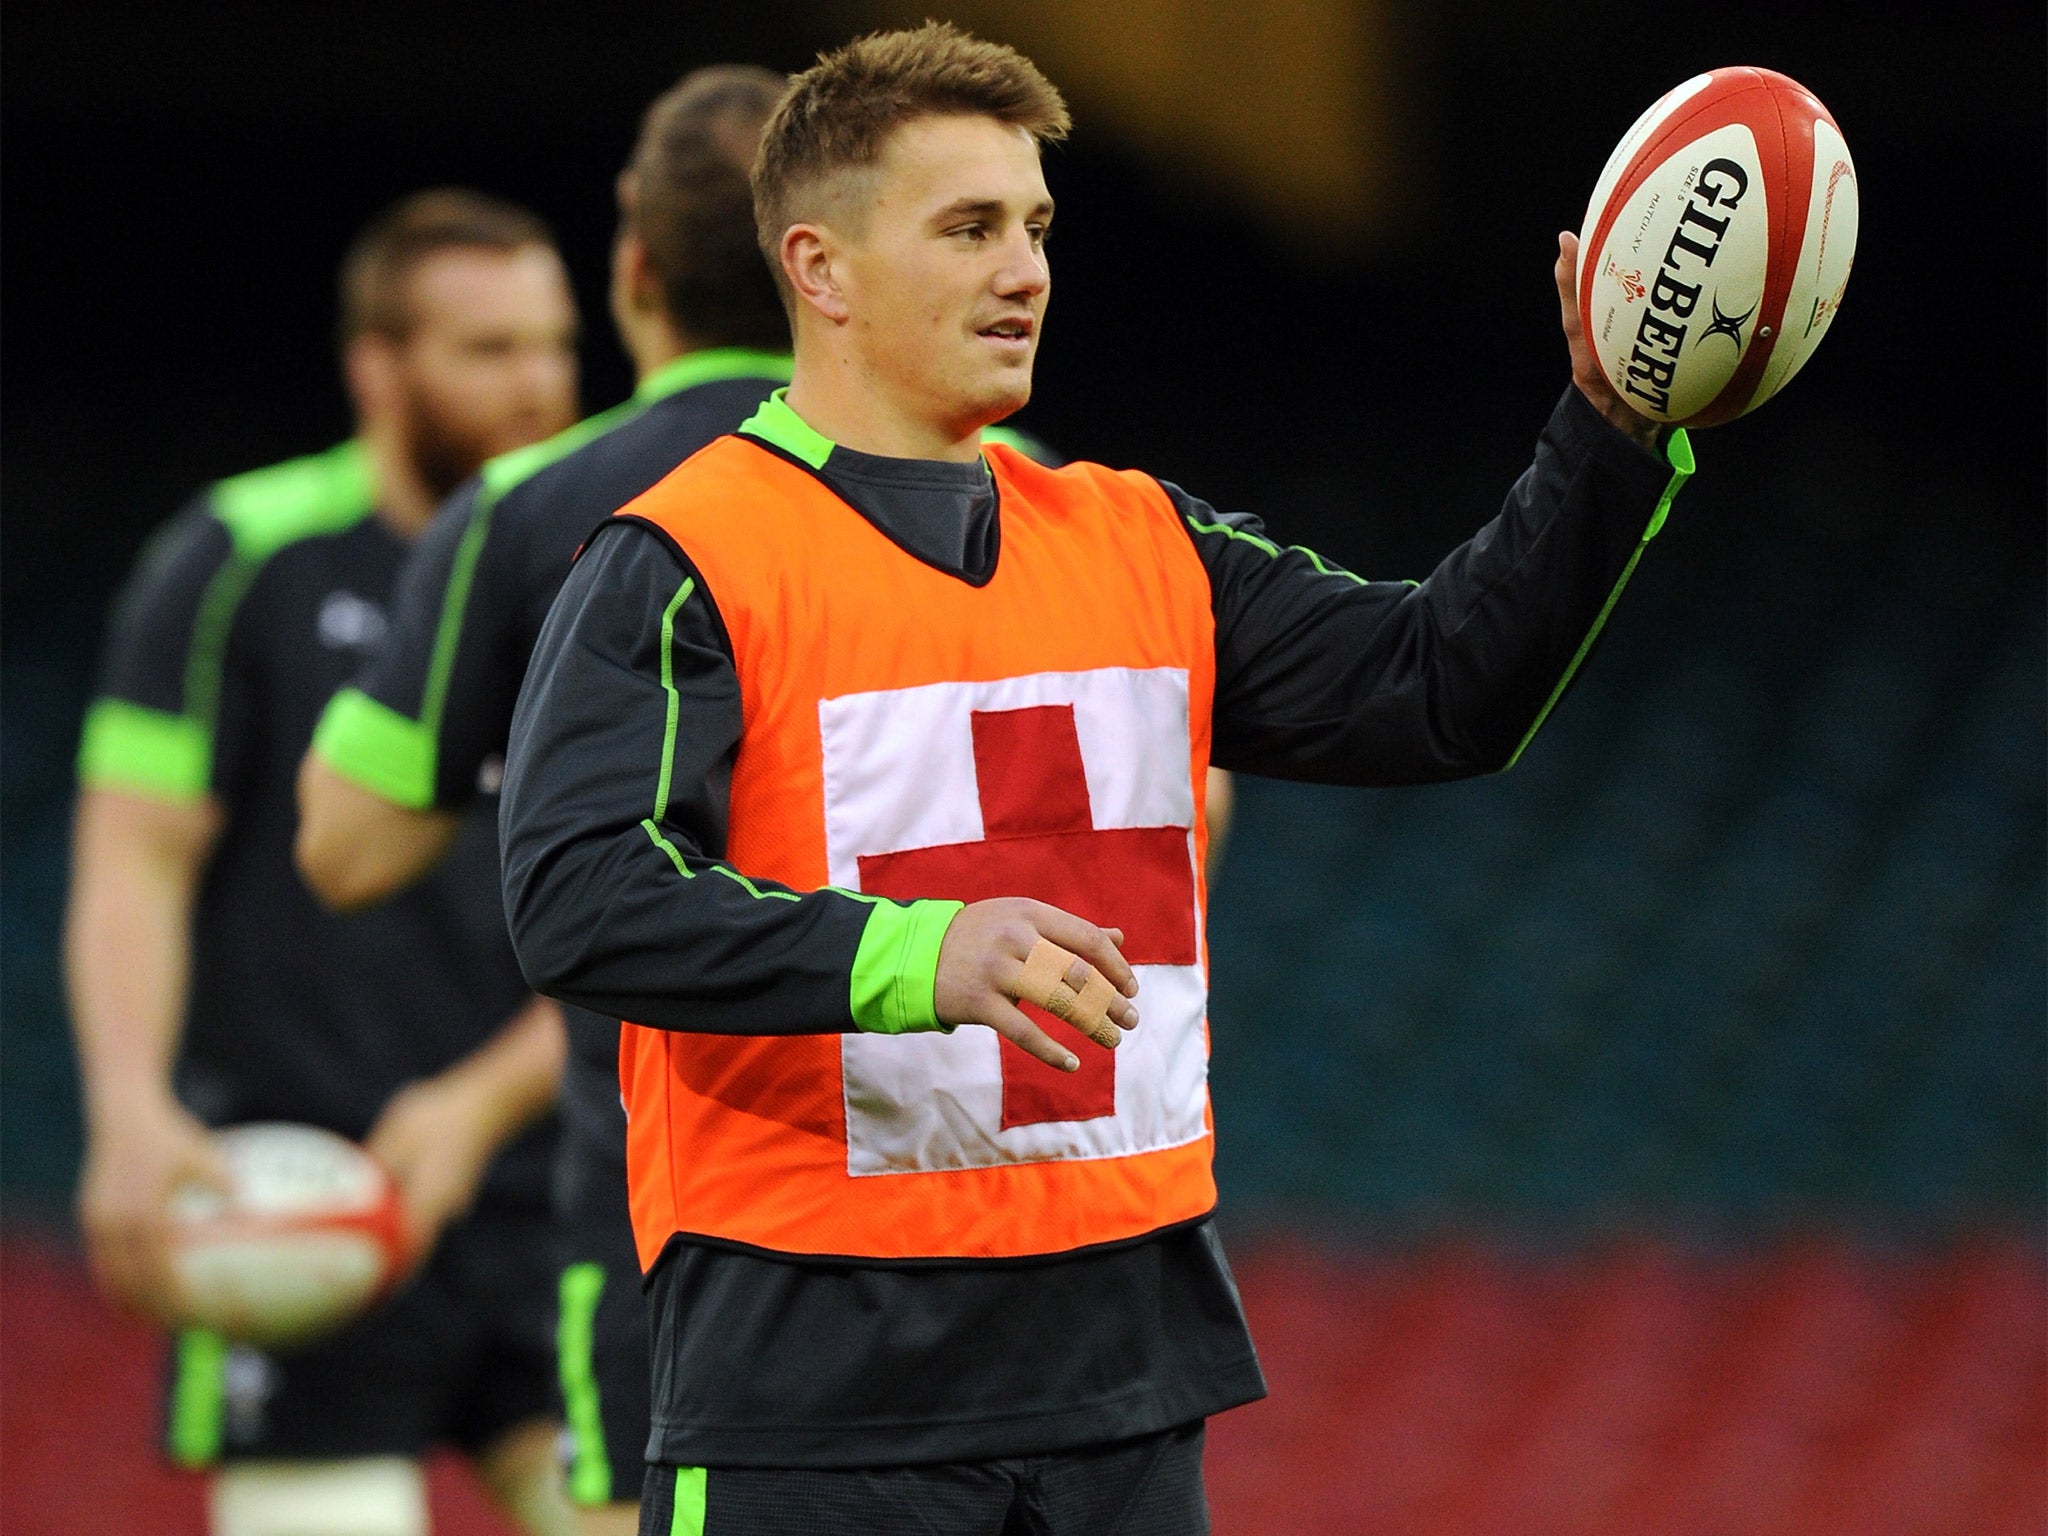 Wales hope the return of centre Jonathan Davies can help bring about their first win over the All Blacks since 1953